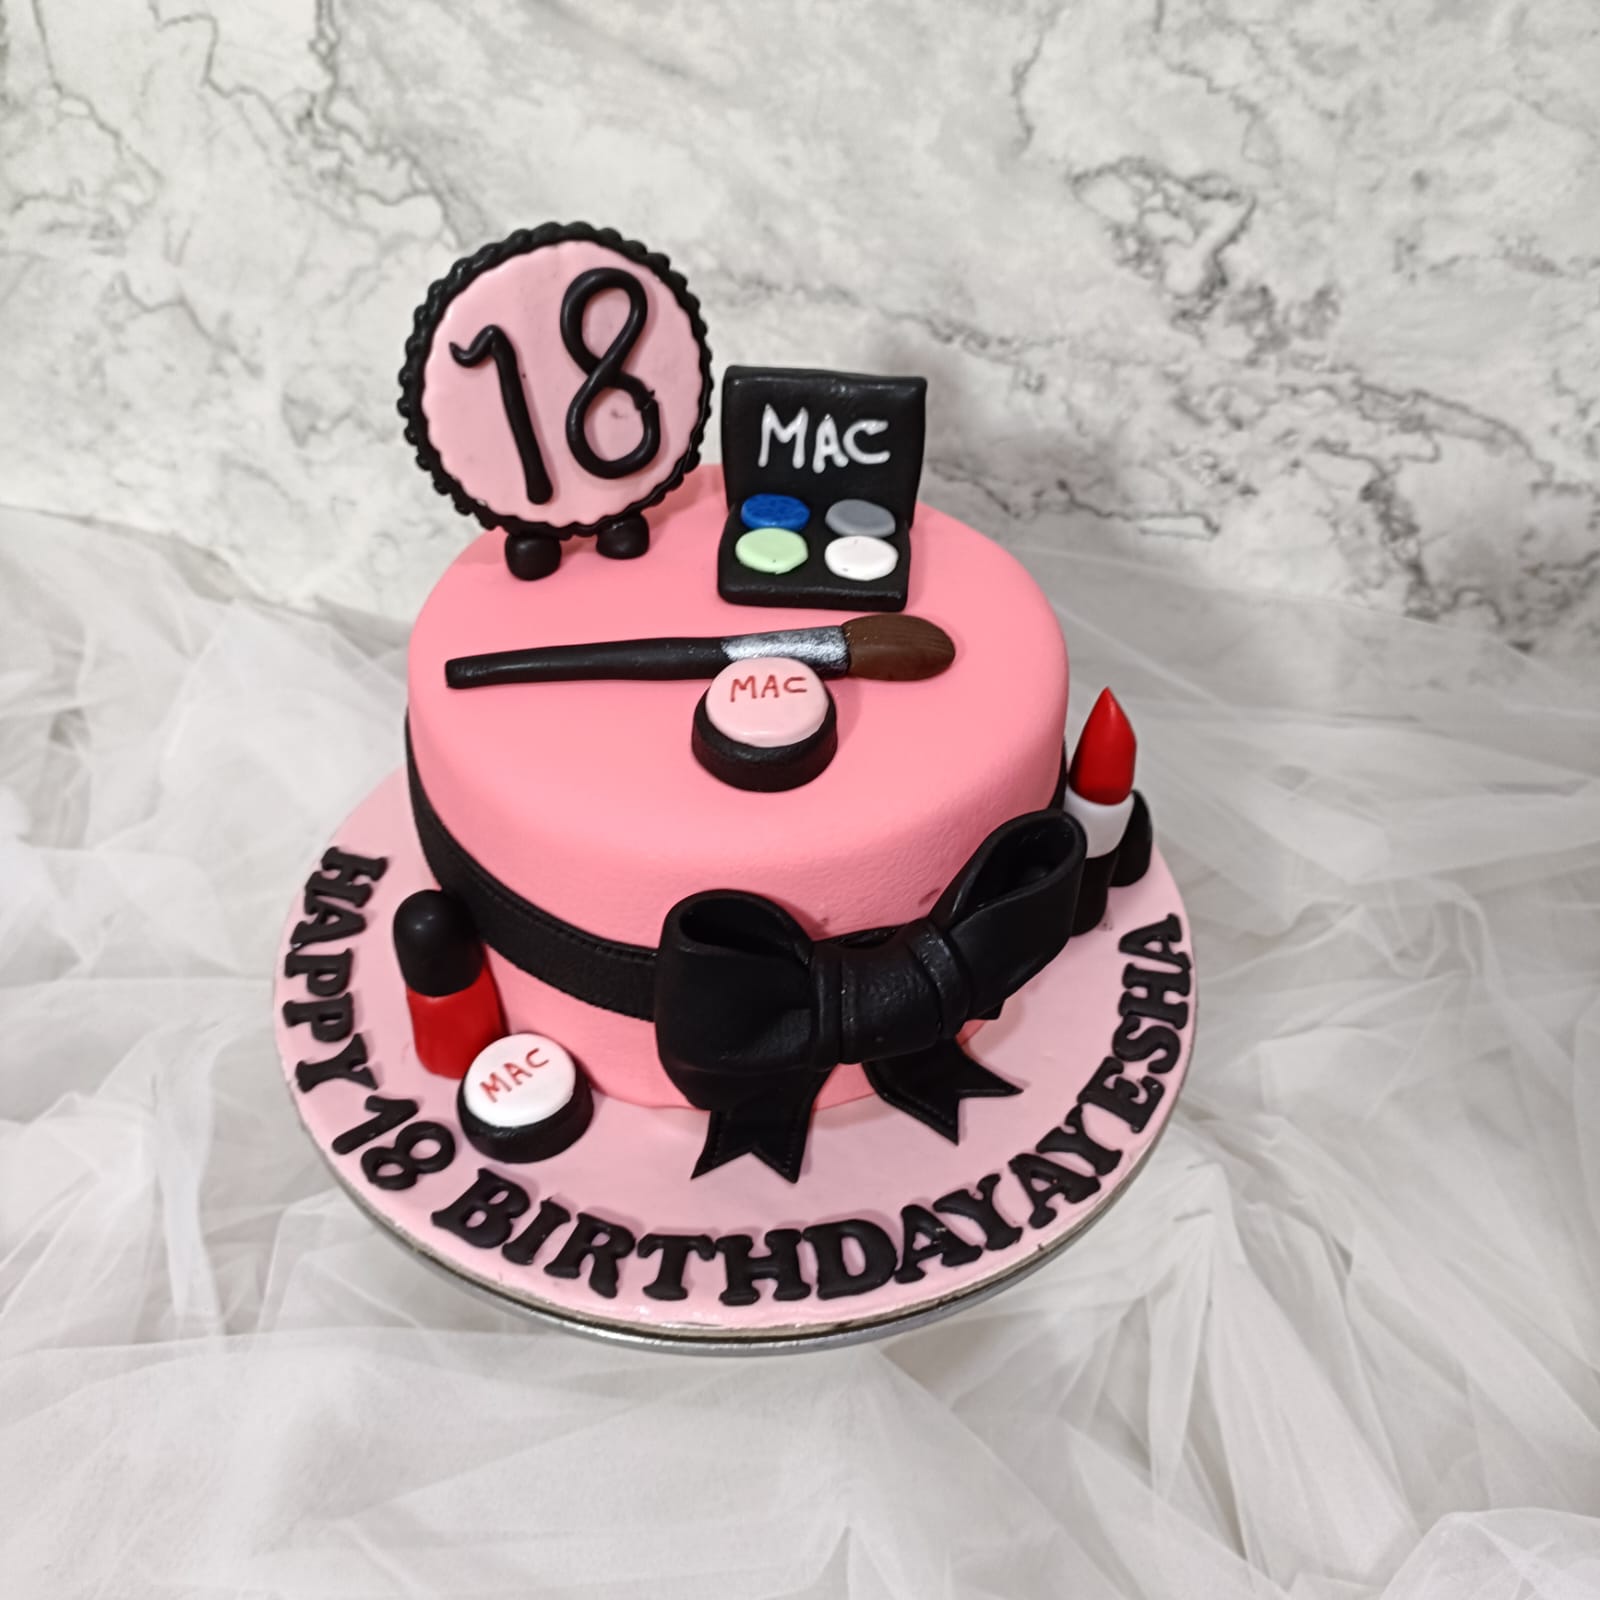 Makeup Cakes from Insta Every Beauty Addict Must See 